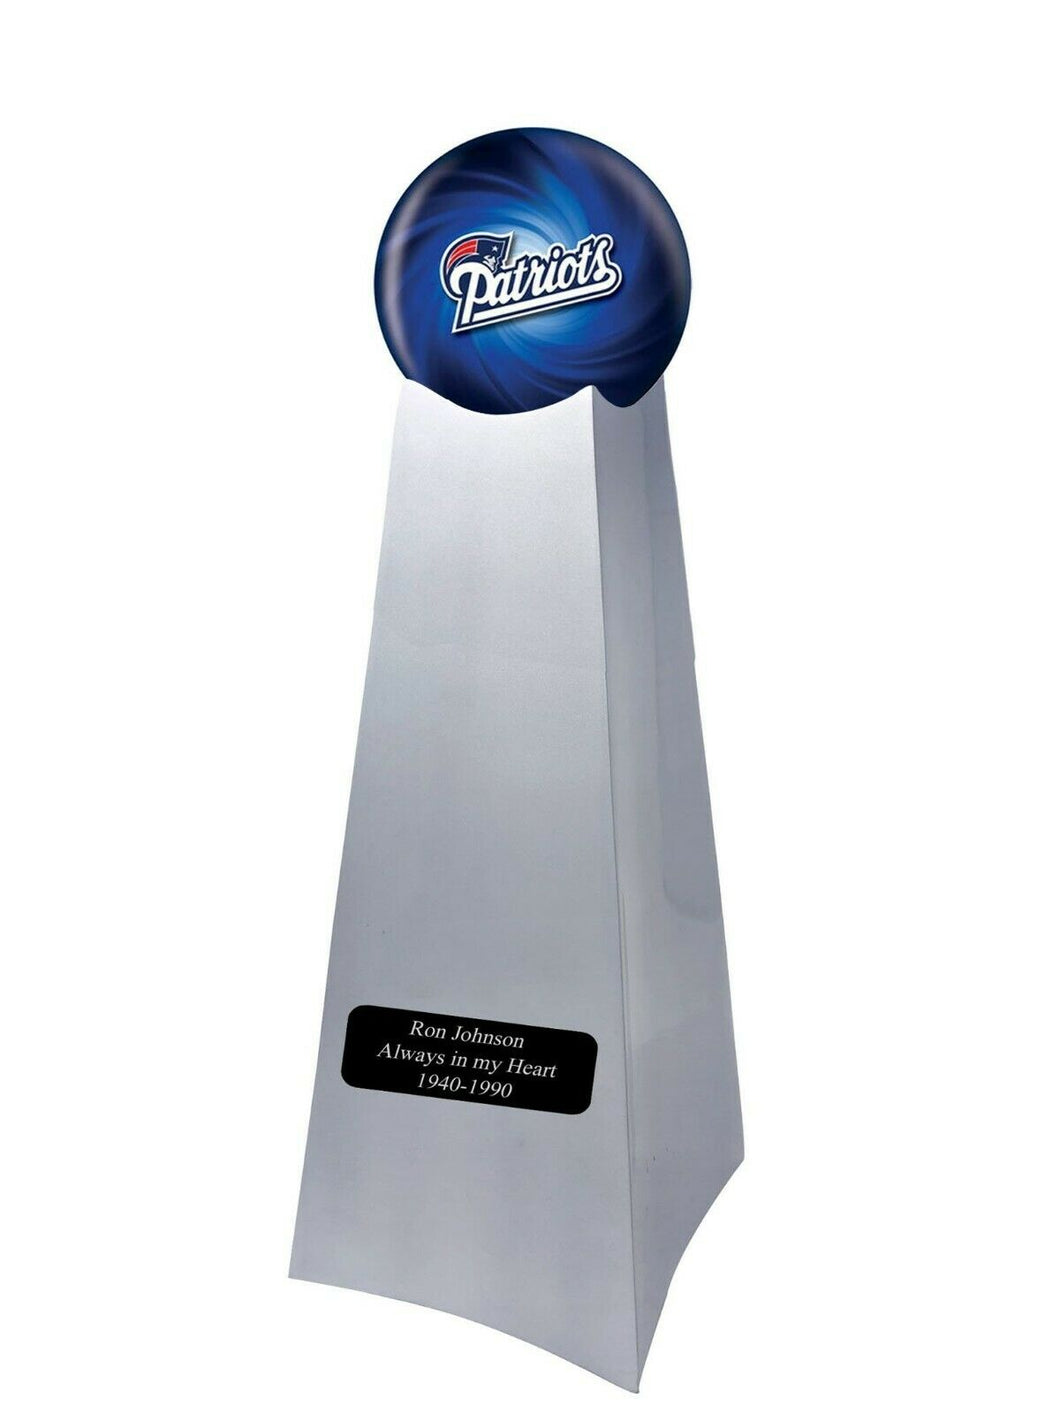 New England Patriots Football Championship Trophy Large/Adult Cremation Urn 200 Cubic Inches